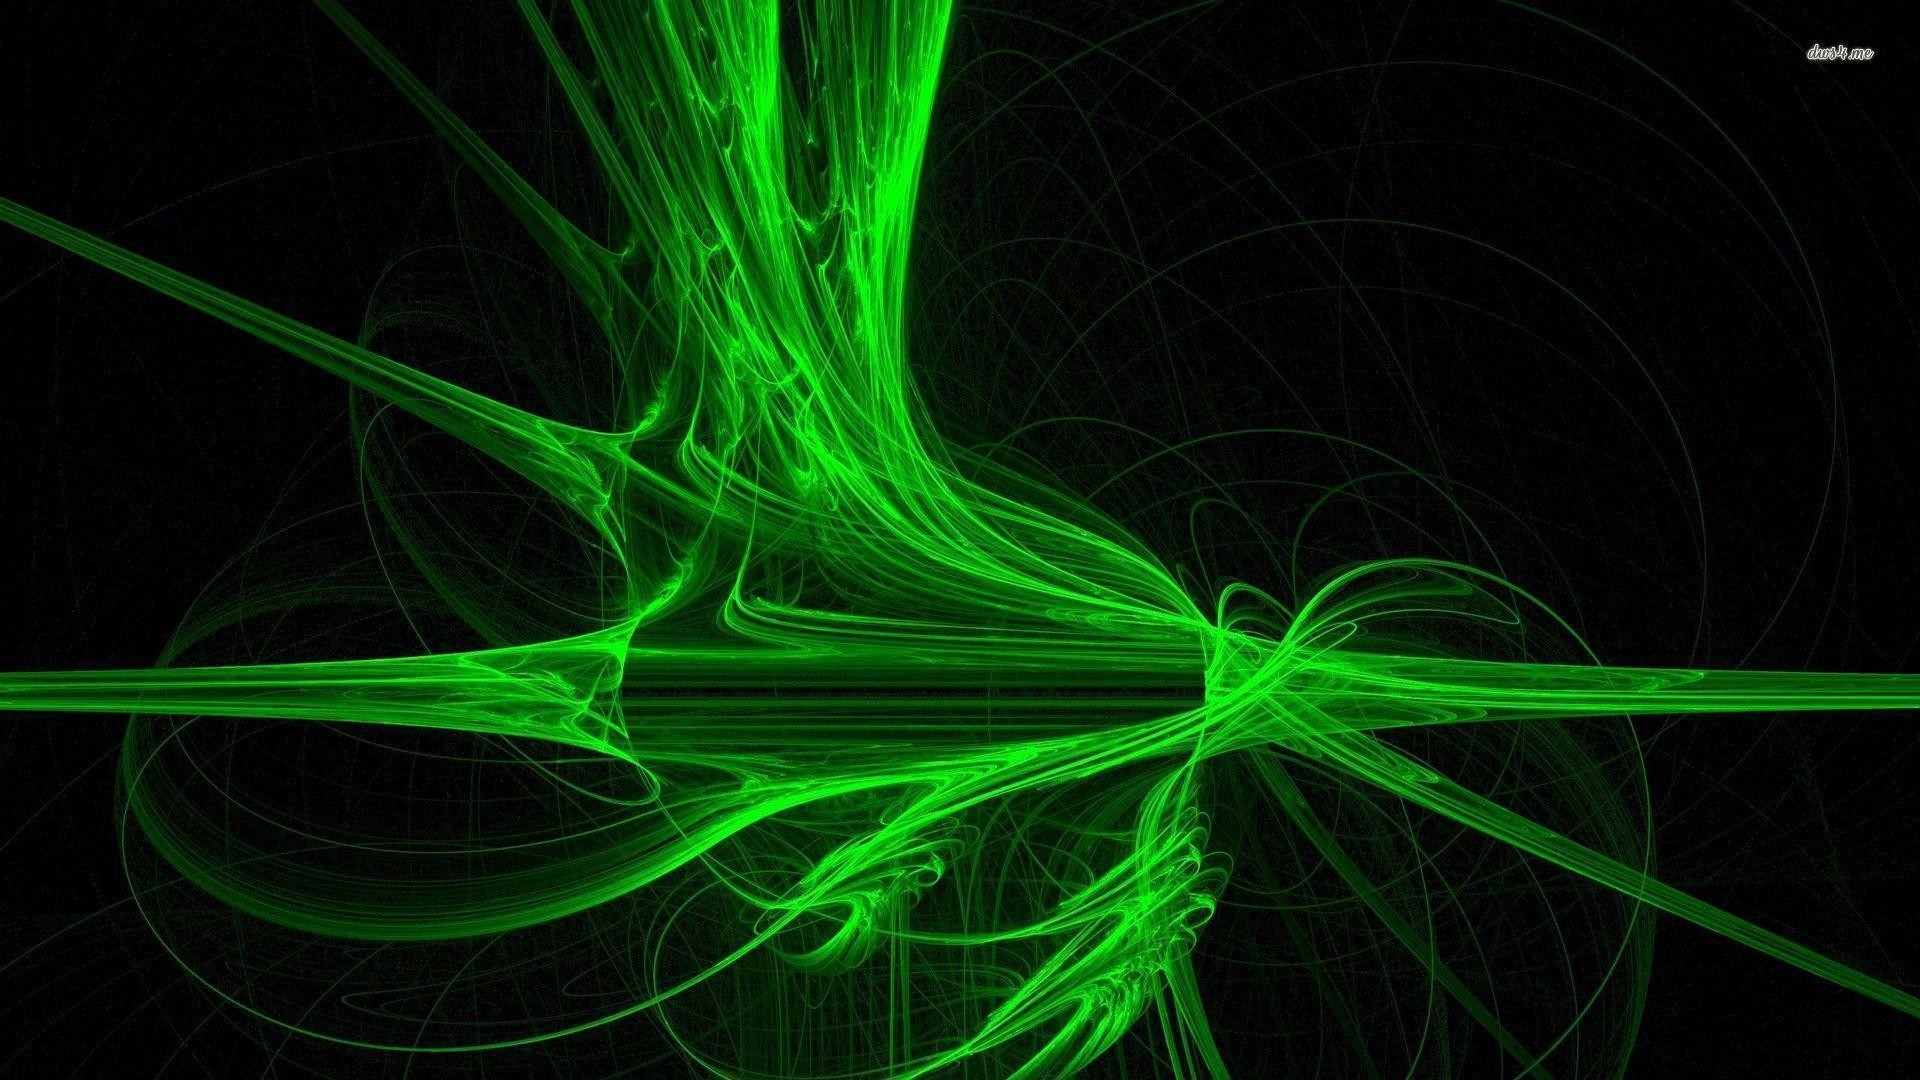 1920x1080 Wallpapers For > Neon Green Abstract Wallpaper